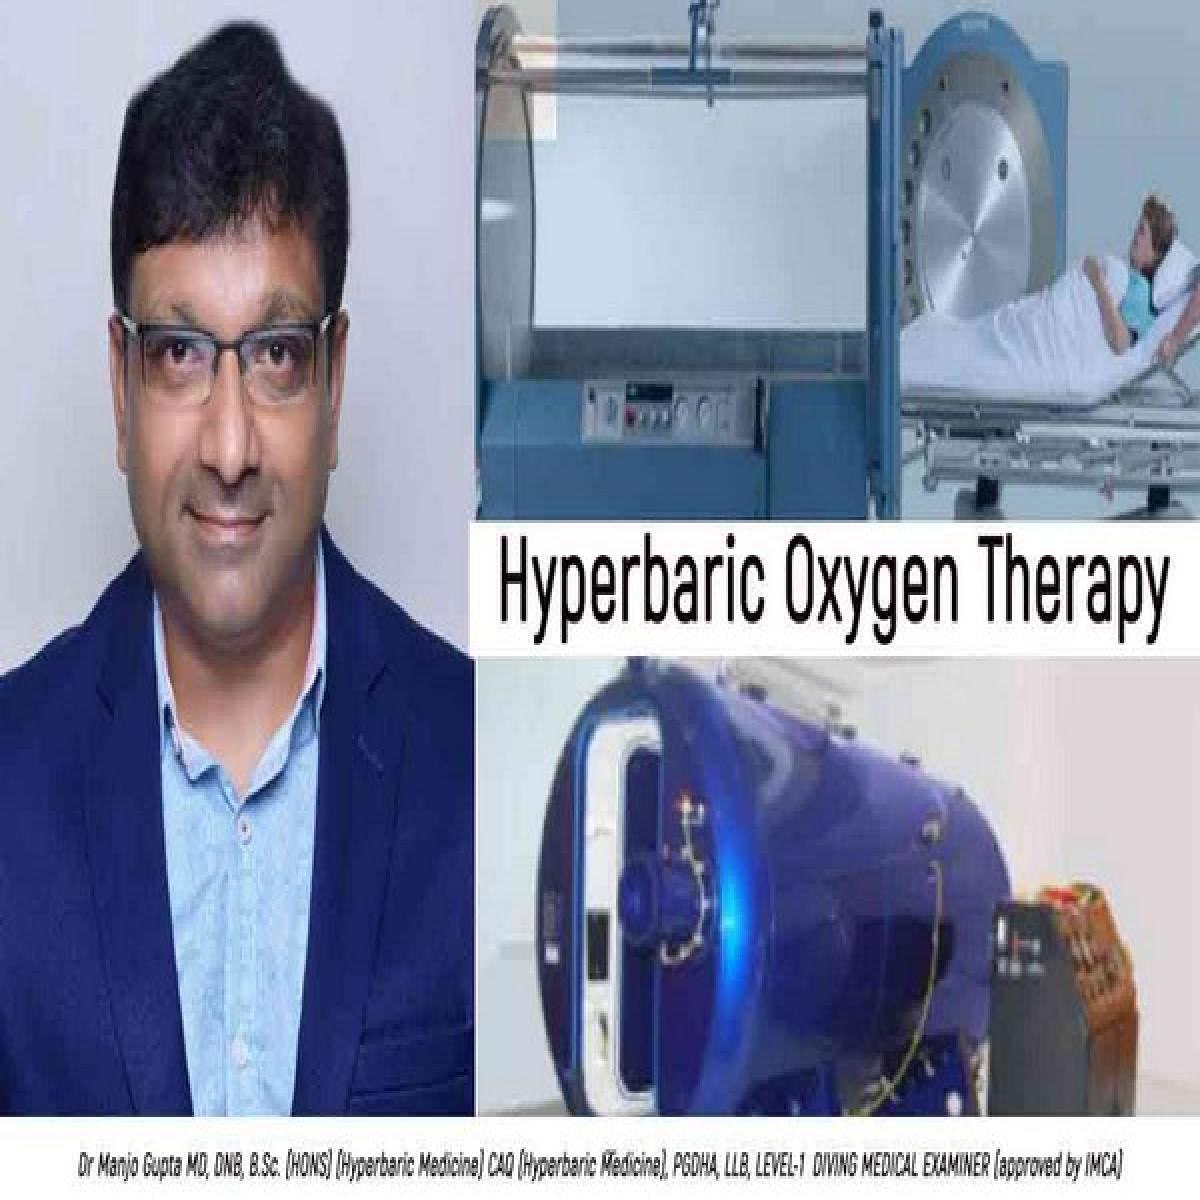 HBOT-India Launches One of the First Medical Grade Hyperbaric Oxygen Therapy in Gurugram, Delhi NCR, India